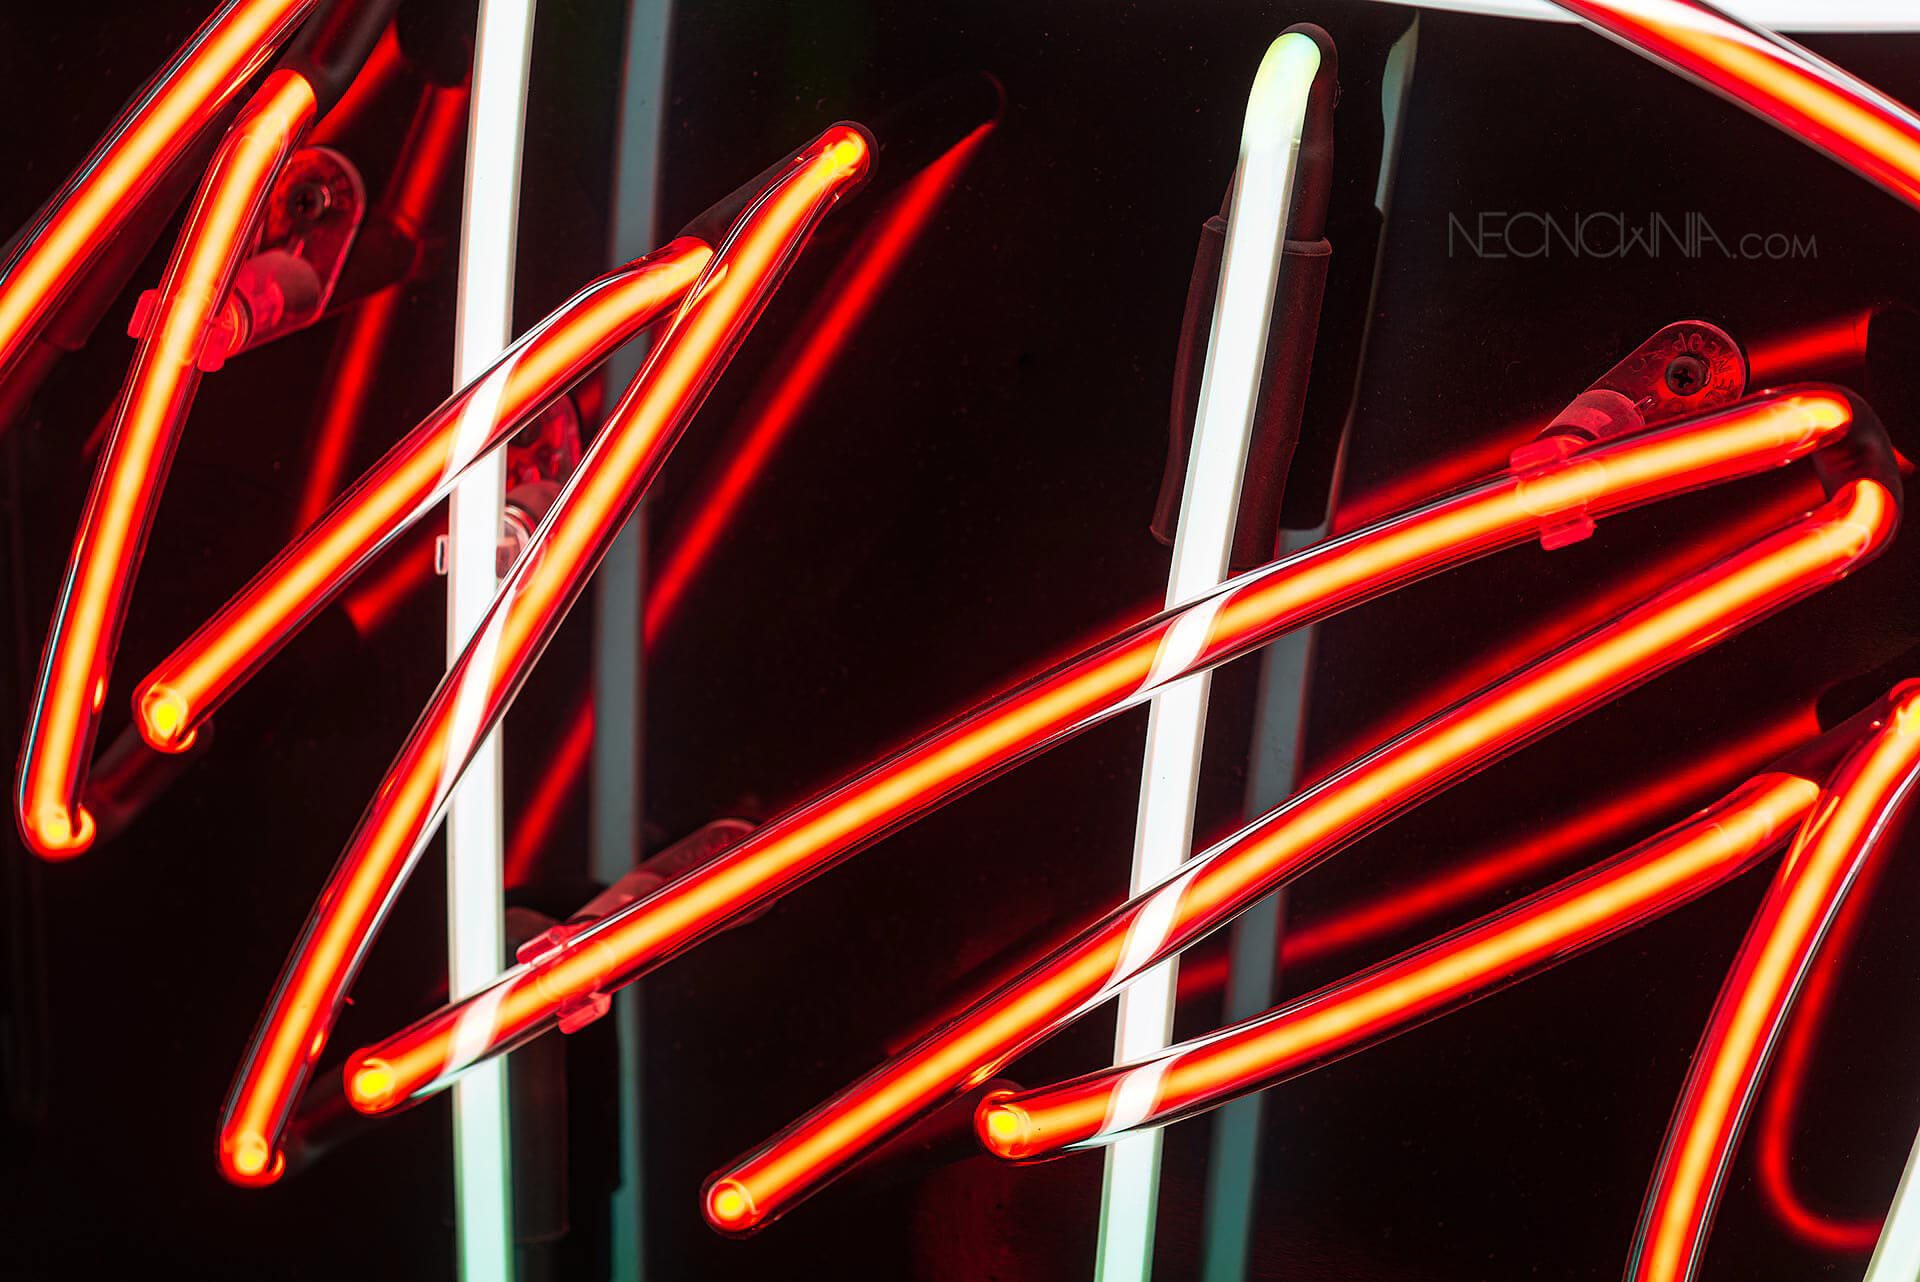 Other neon sign